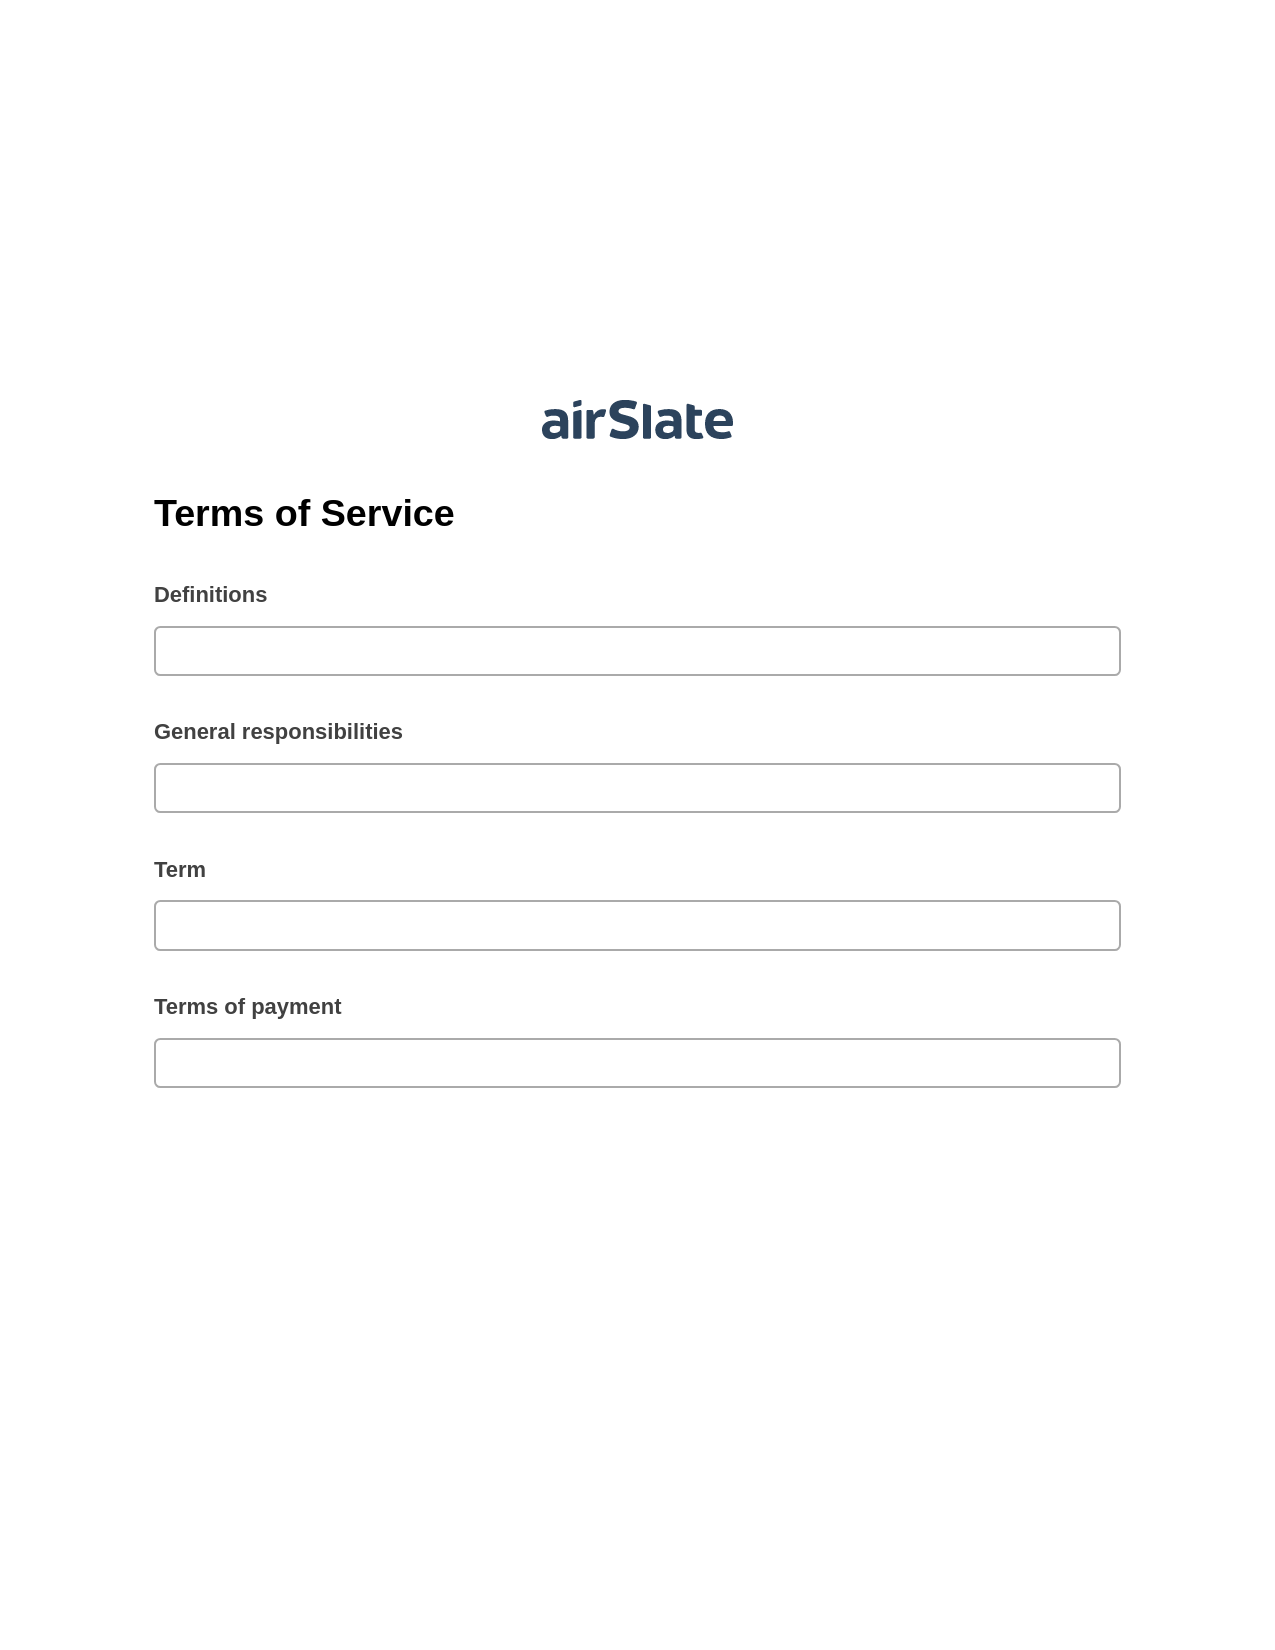 Multirole Terms of Service Pre-fill Dropdown from Airtable, Remove Slate Bot, Export to Smartsheet